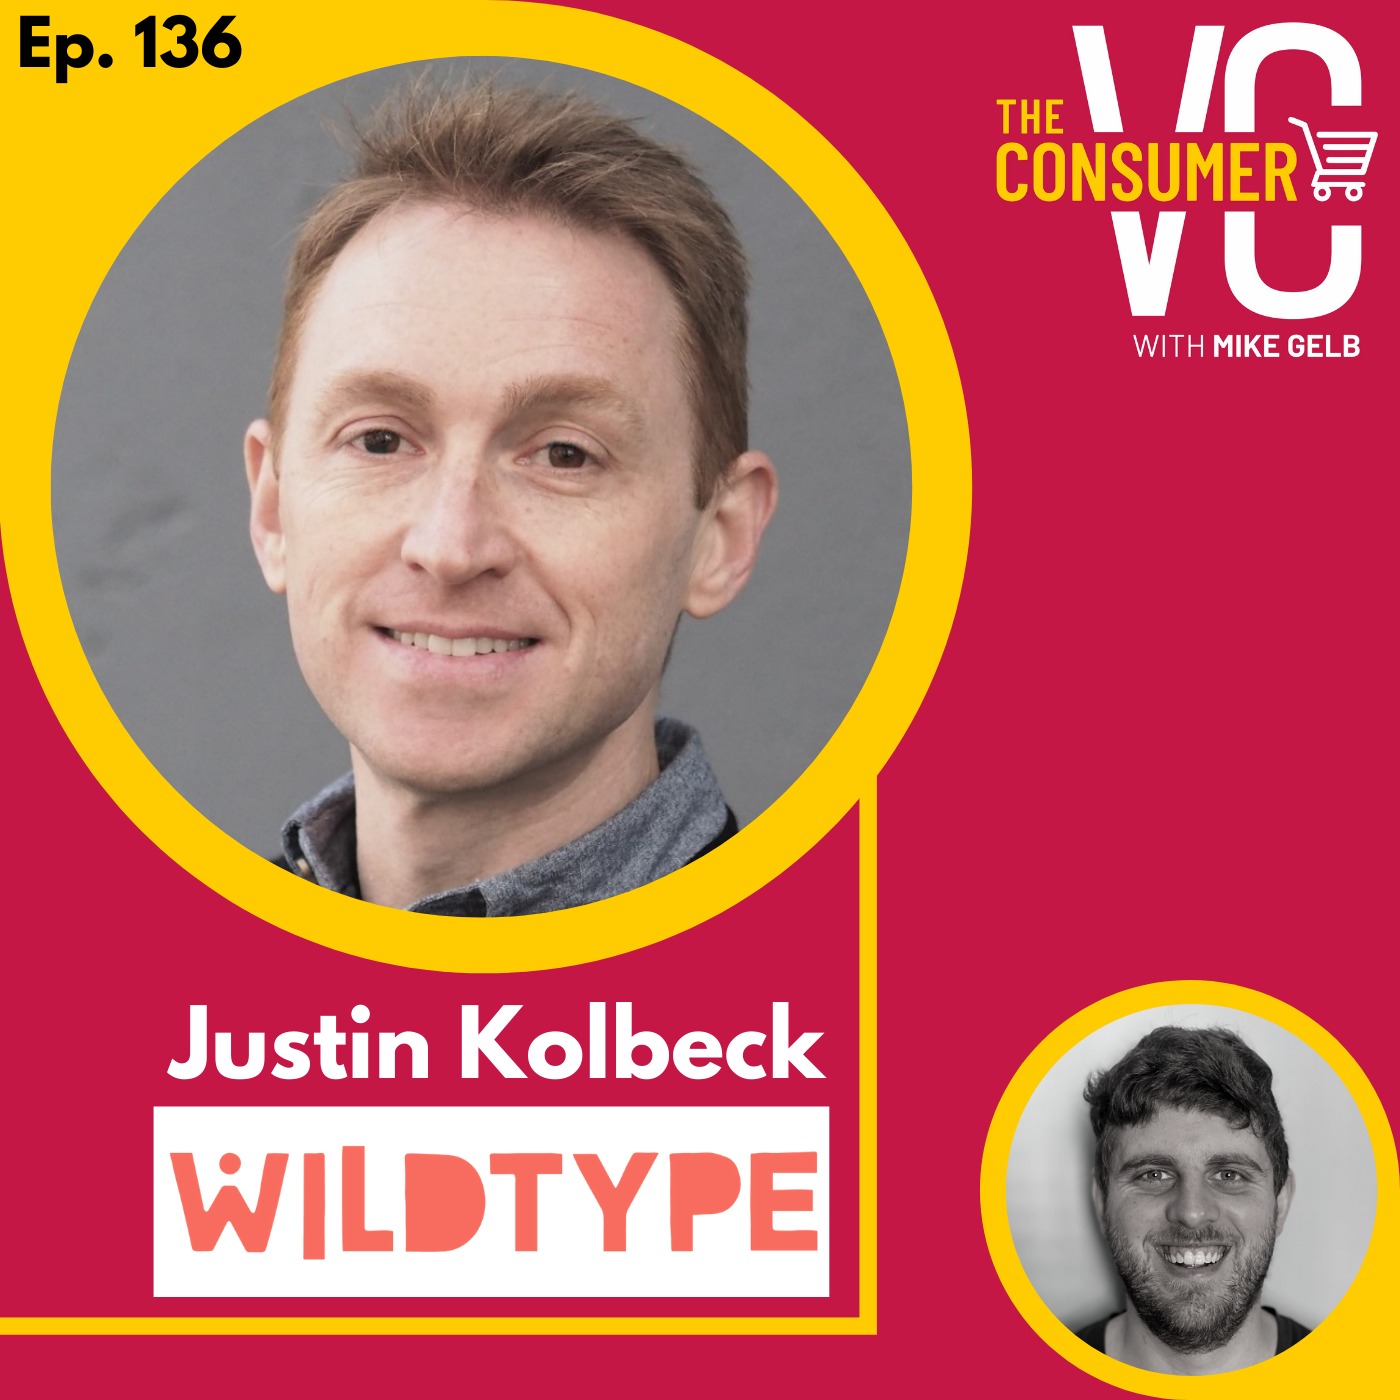 Justin Kolbeck (Wild Type) - Creating the most sustainable seafood, the state of the ocean, and developing fast feedback loops